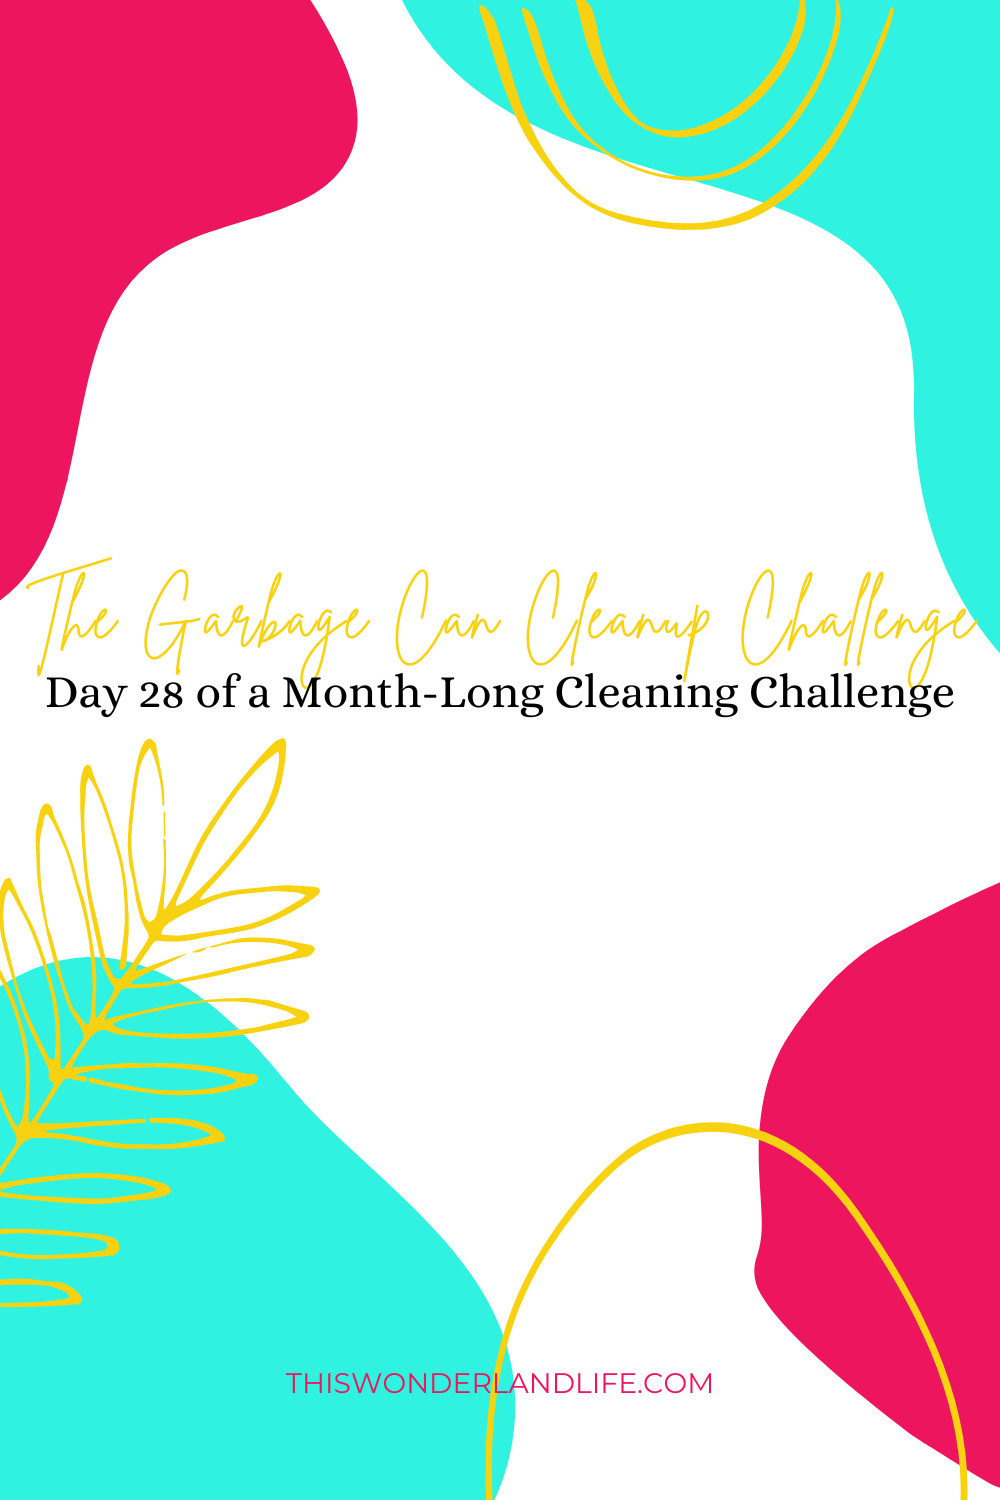 The Garbage Can Cleanup Challenge: Day 28 of a Month-Long Cleaning Challenge